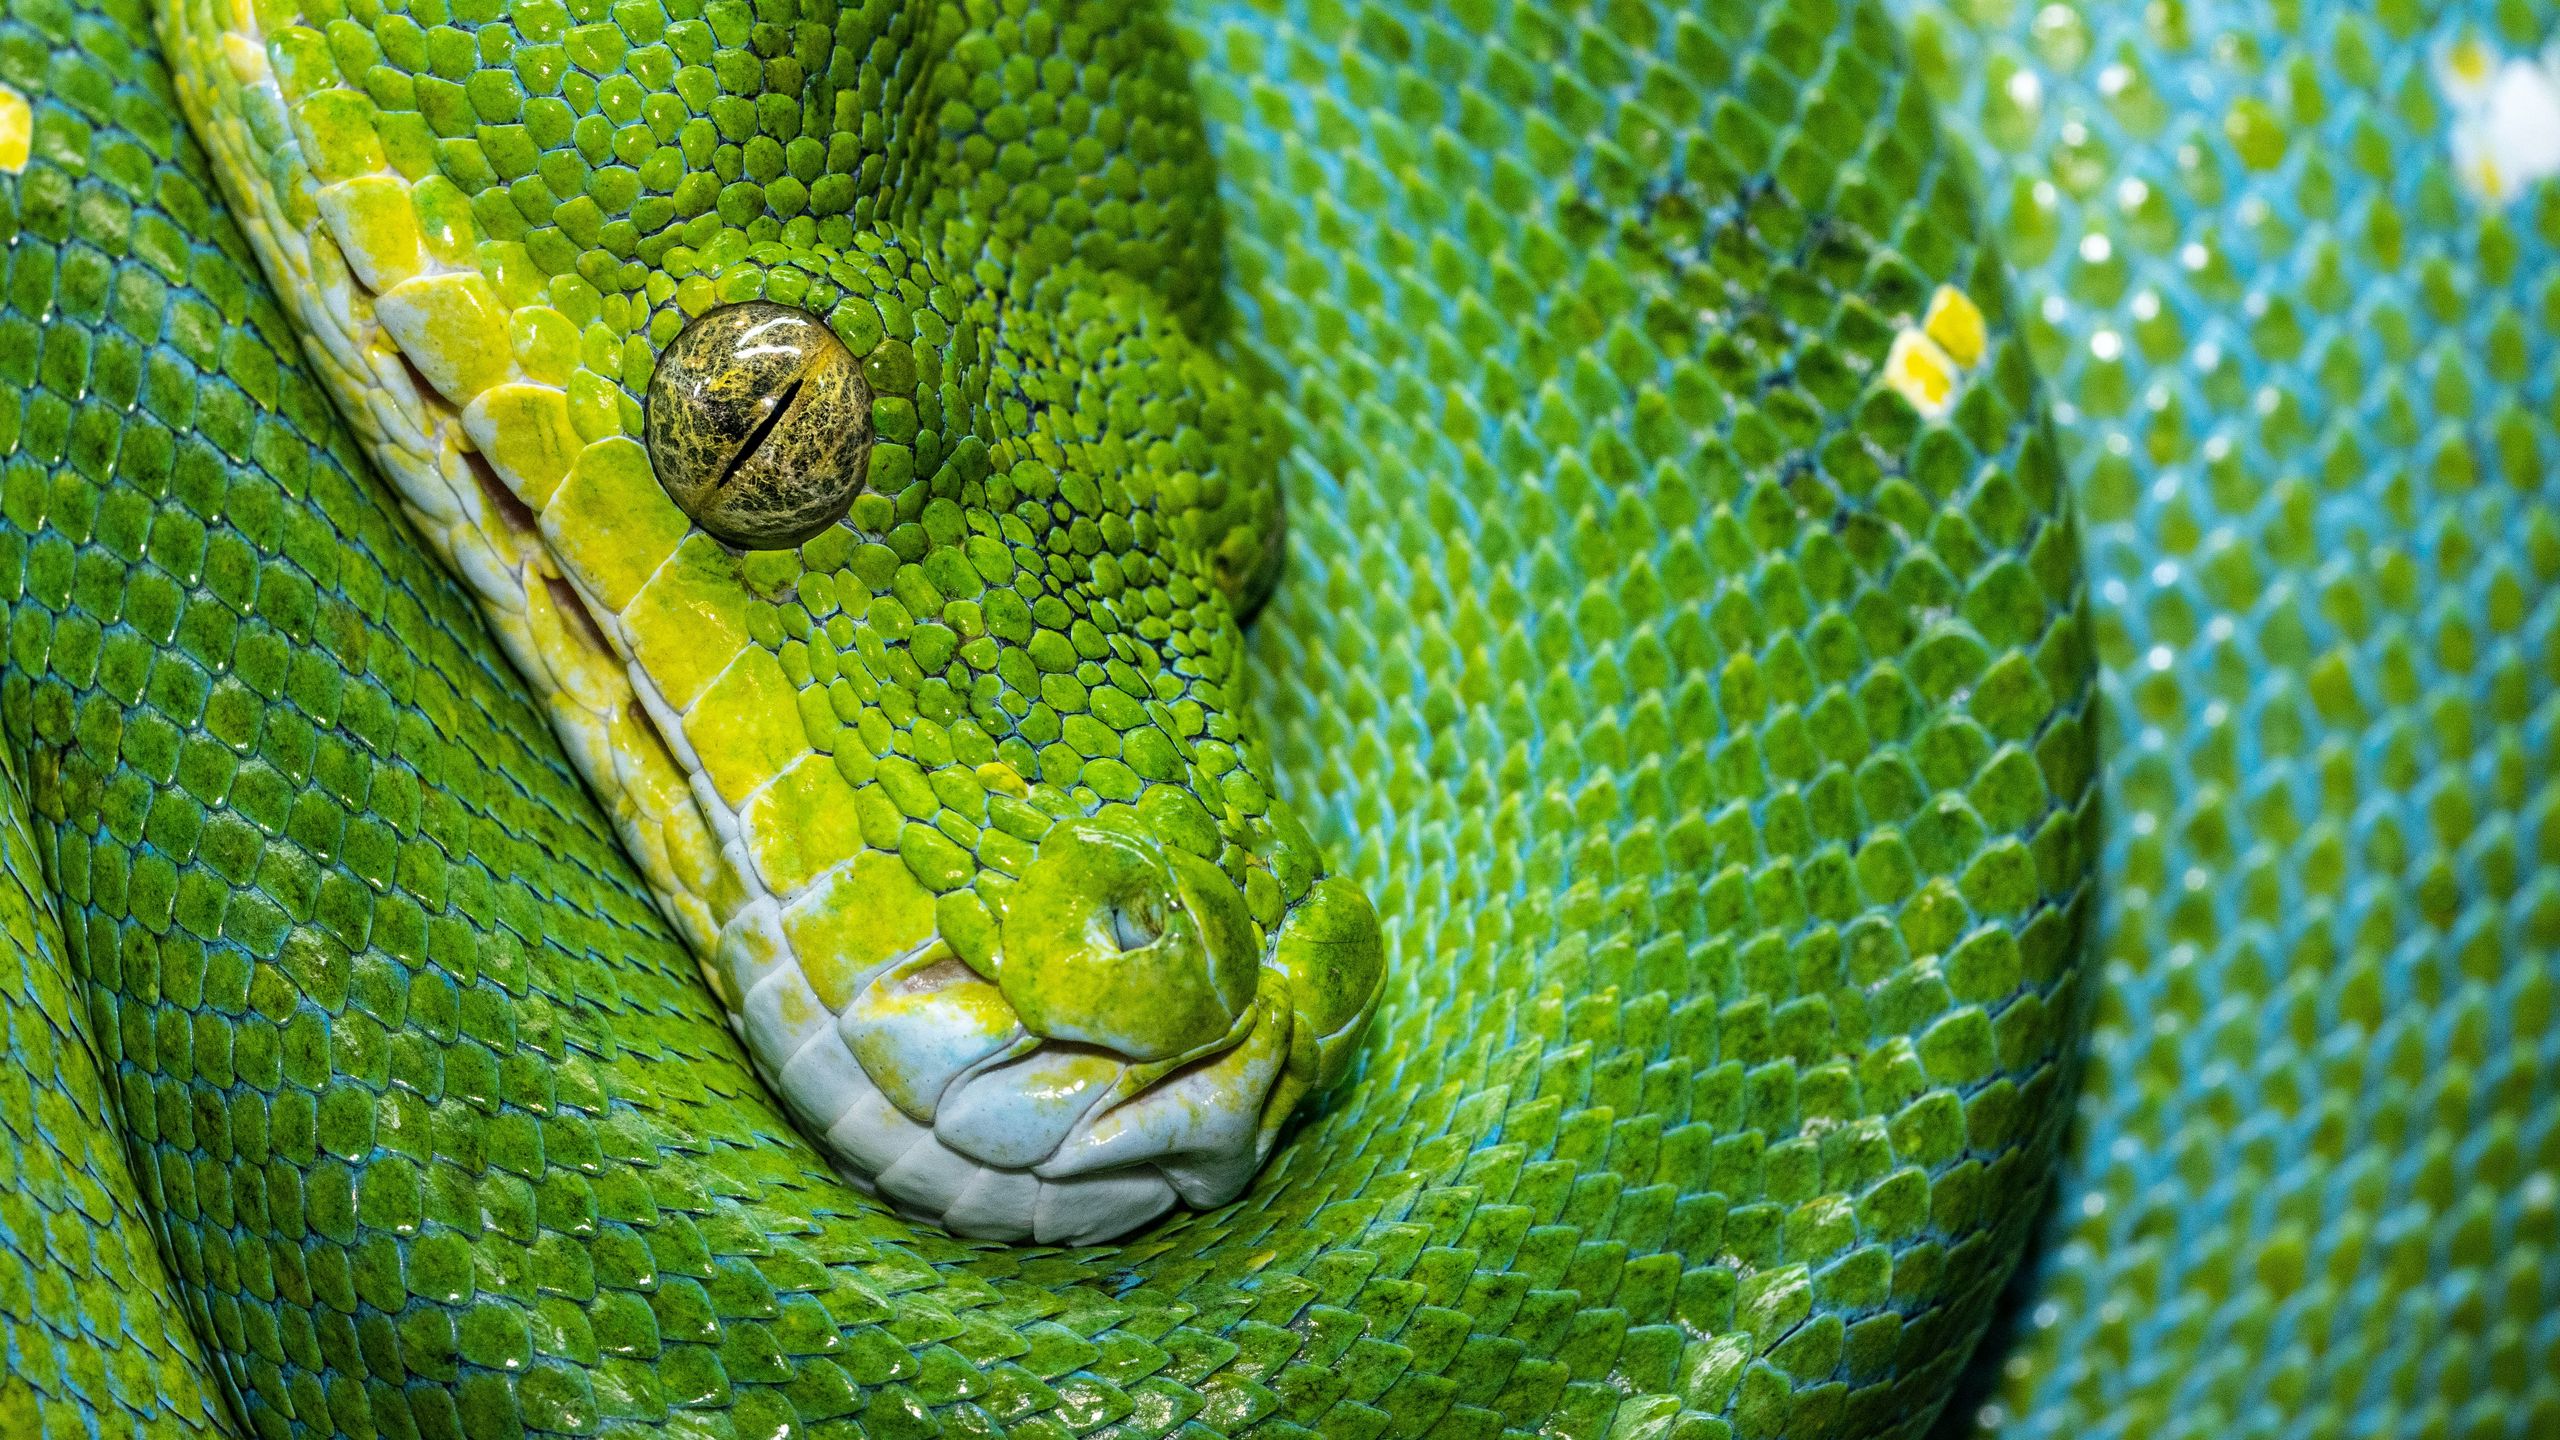 Download Wallpaper 2560x1440 Snake Scales Green Reptile Widescreen